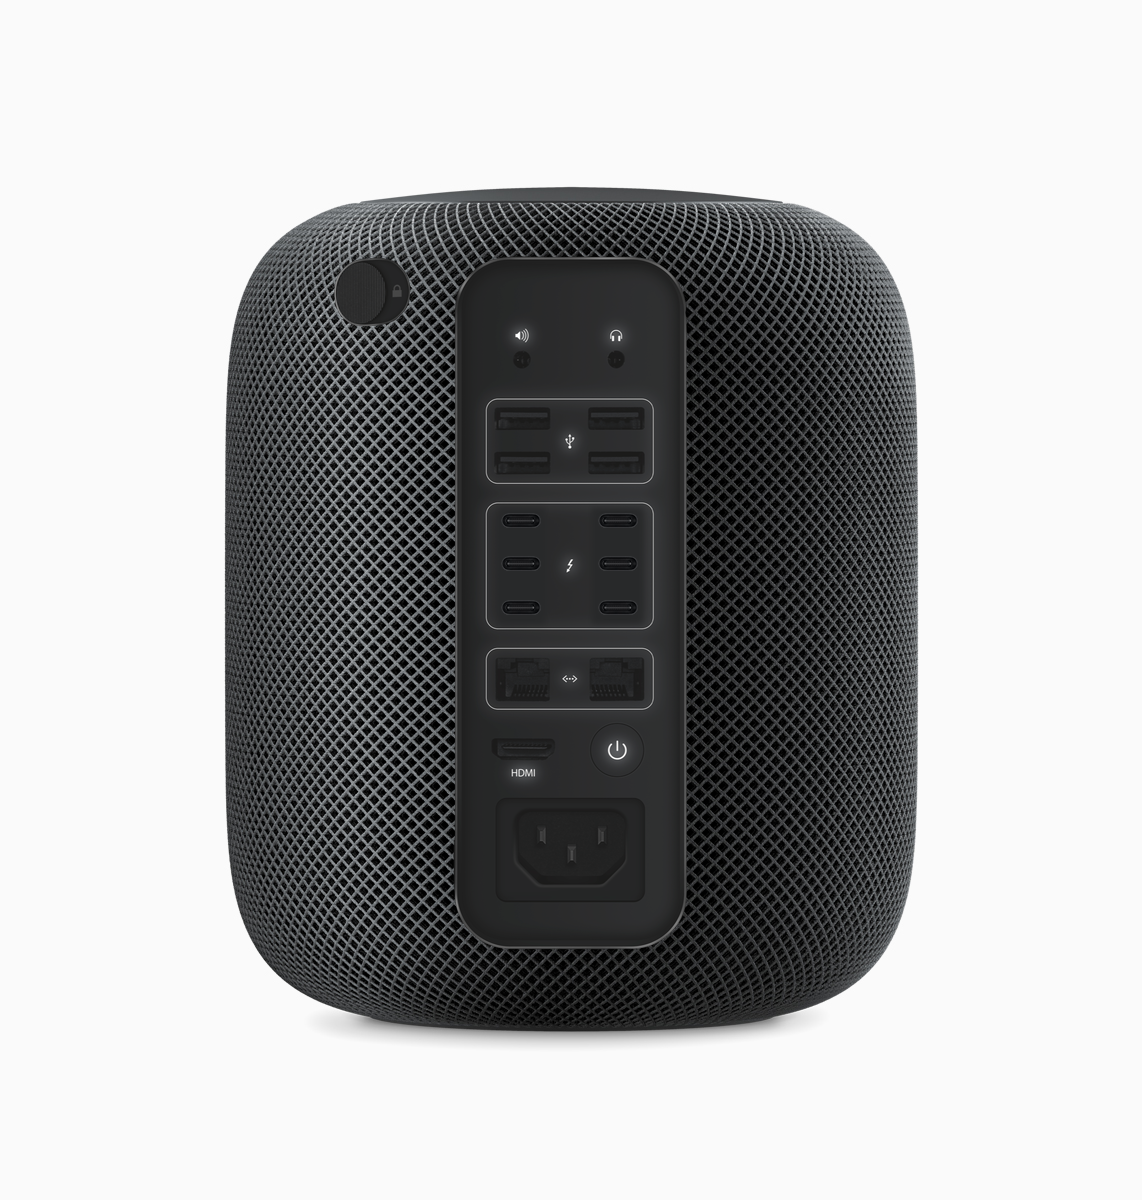 HomePod Pro: a combination of the Space Gray fabric exterior of the HomePod but with the I/O of the 2013 Mac Pro + six Thunderbolt 4 ports.